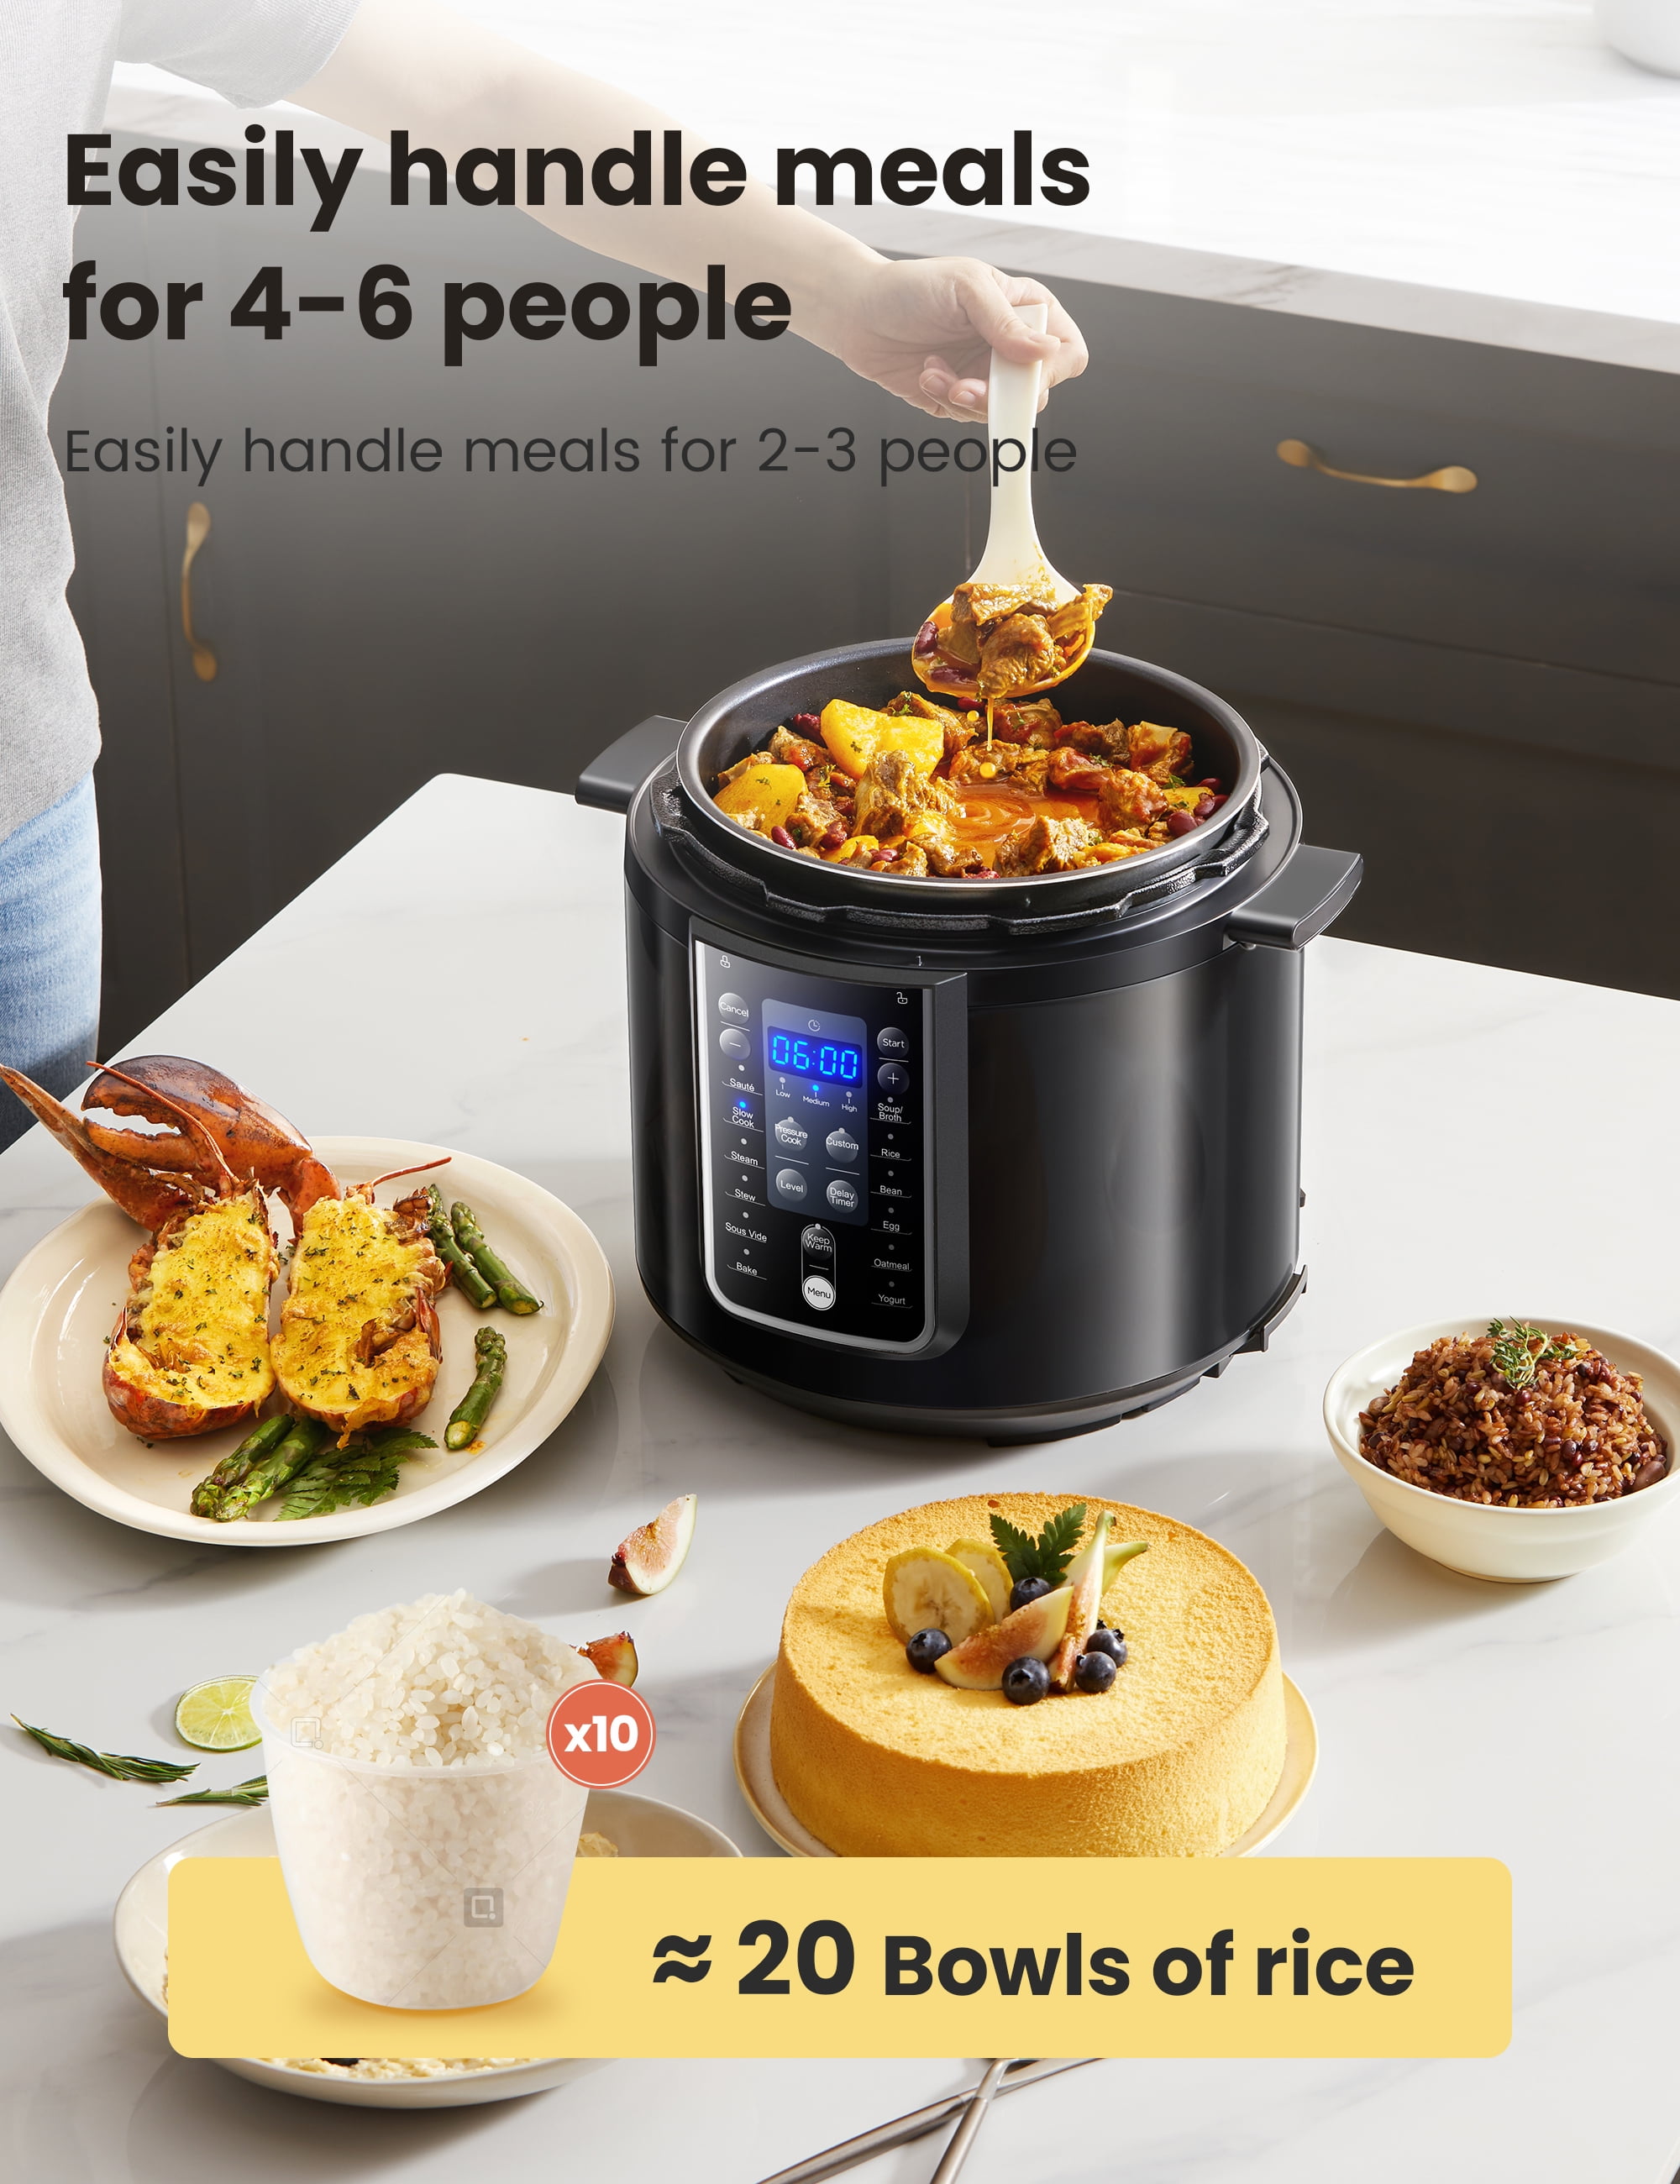 COMFEE' Pressure Cooker 6 Quart with 12 Presets, Multi-Functional  Programmable Slow Cooker, Rice Cooker, Steamer, Sauté pan, Egg Cooker,  Warmer and More